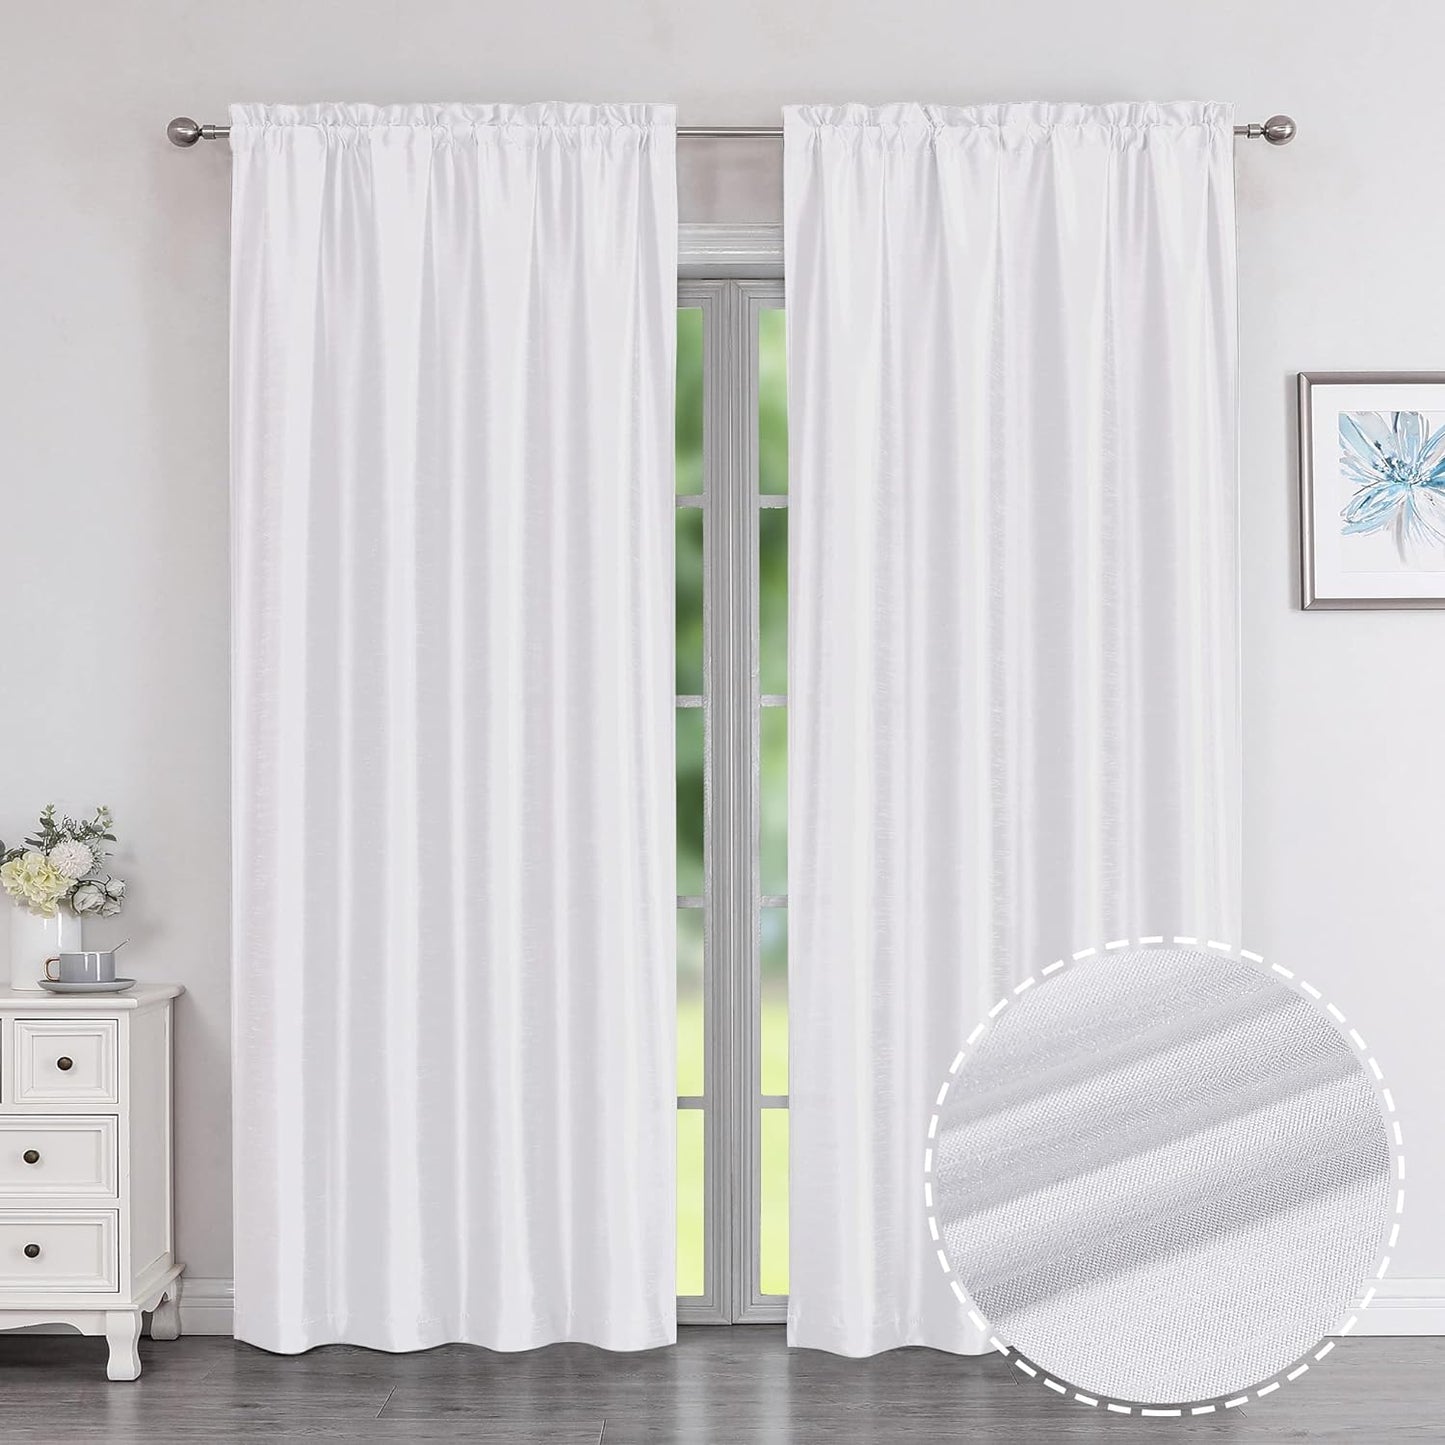 Chyhomenyc Uptown Sage Green Kitchen Curtains 45 Inch Length 2 Panels, Room Darkening Faux Silk Chic Fabric Short Window Curtains for Bedroom Living Room, Each 30Wx45L  Chyhomenyc White 2X40"Wx84"L 